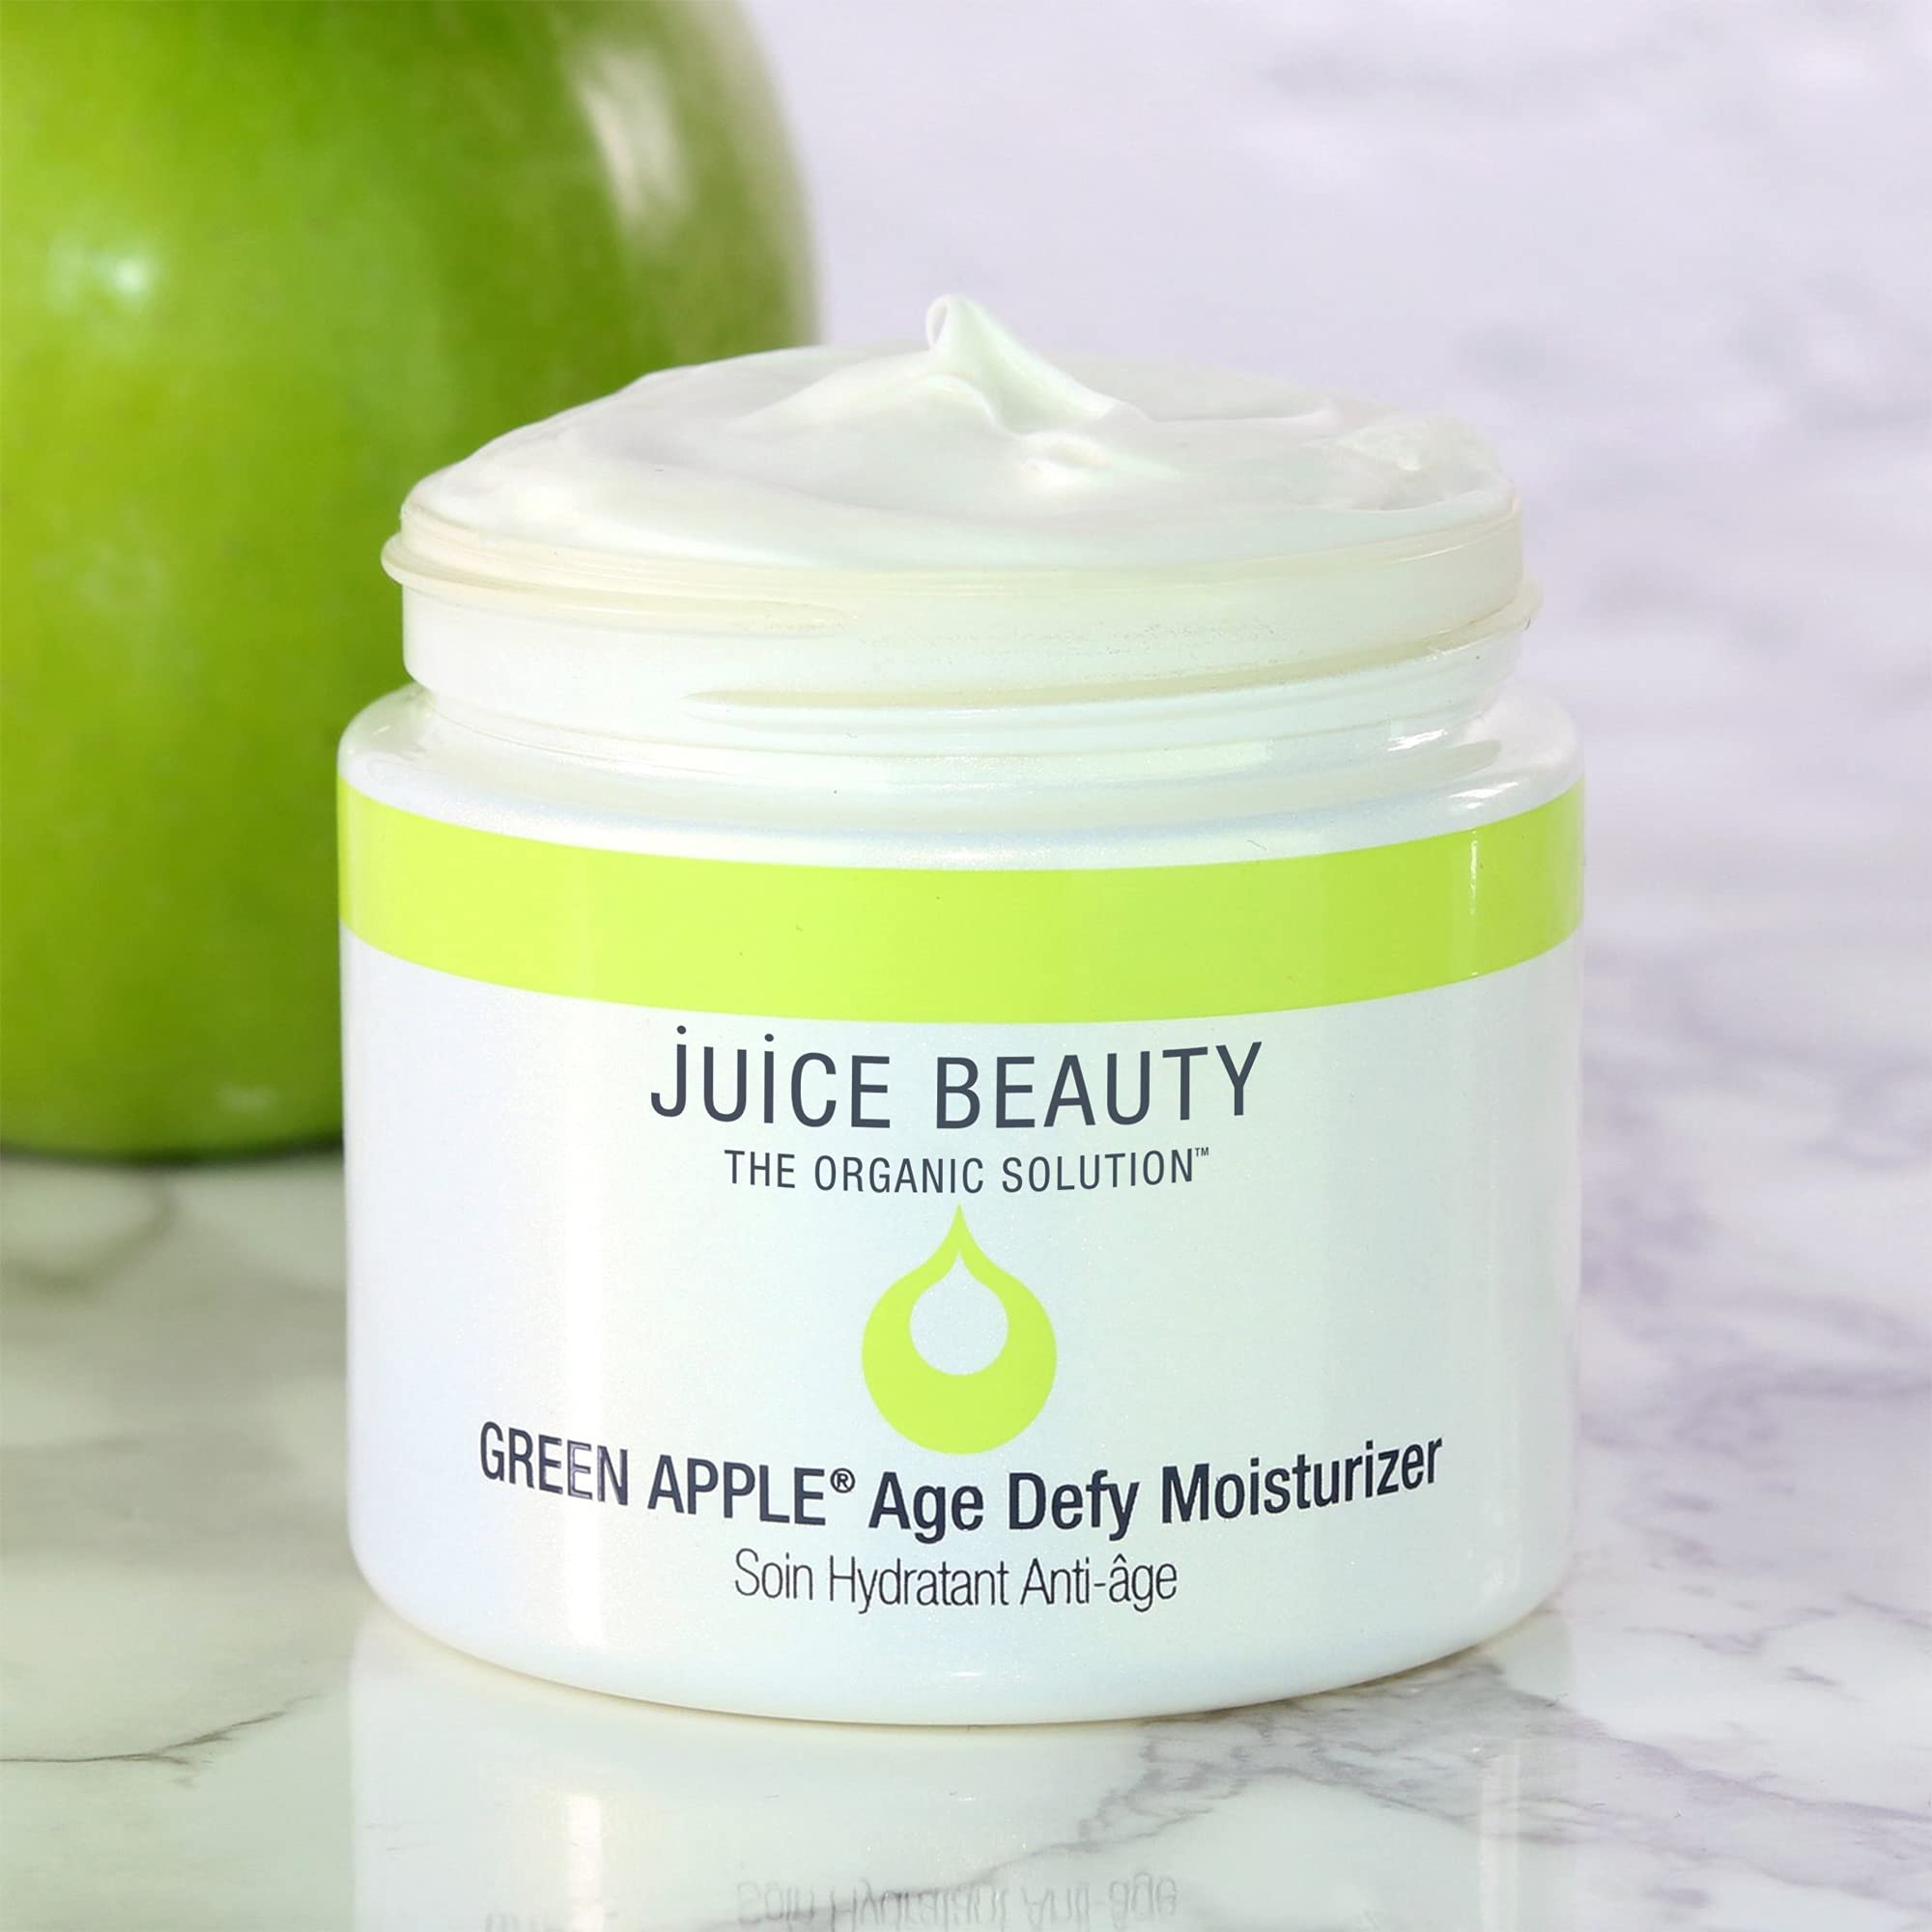 Juice Beauty GREEN APPLE Age Defy Face Moisturizer - Peptides, Green Tea - Brightening and Smoothing Skin - Clinically Proven Formula - Powerful Antioxidant Cocktail - 2 fl oz